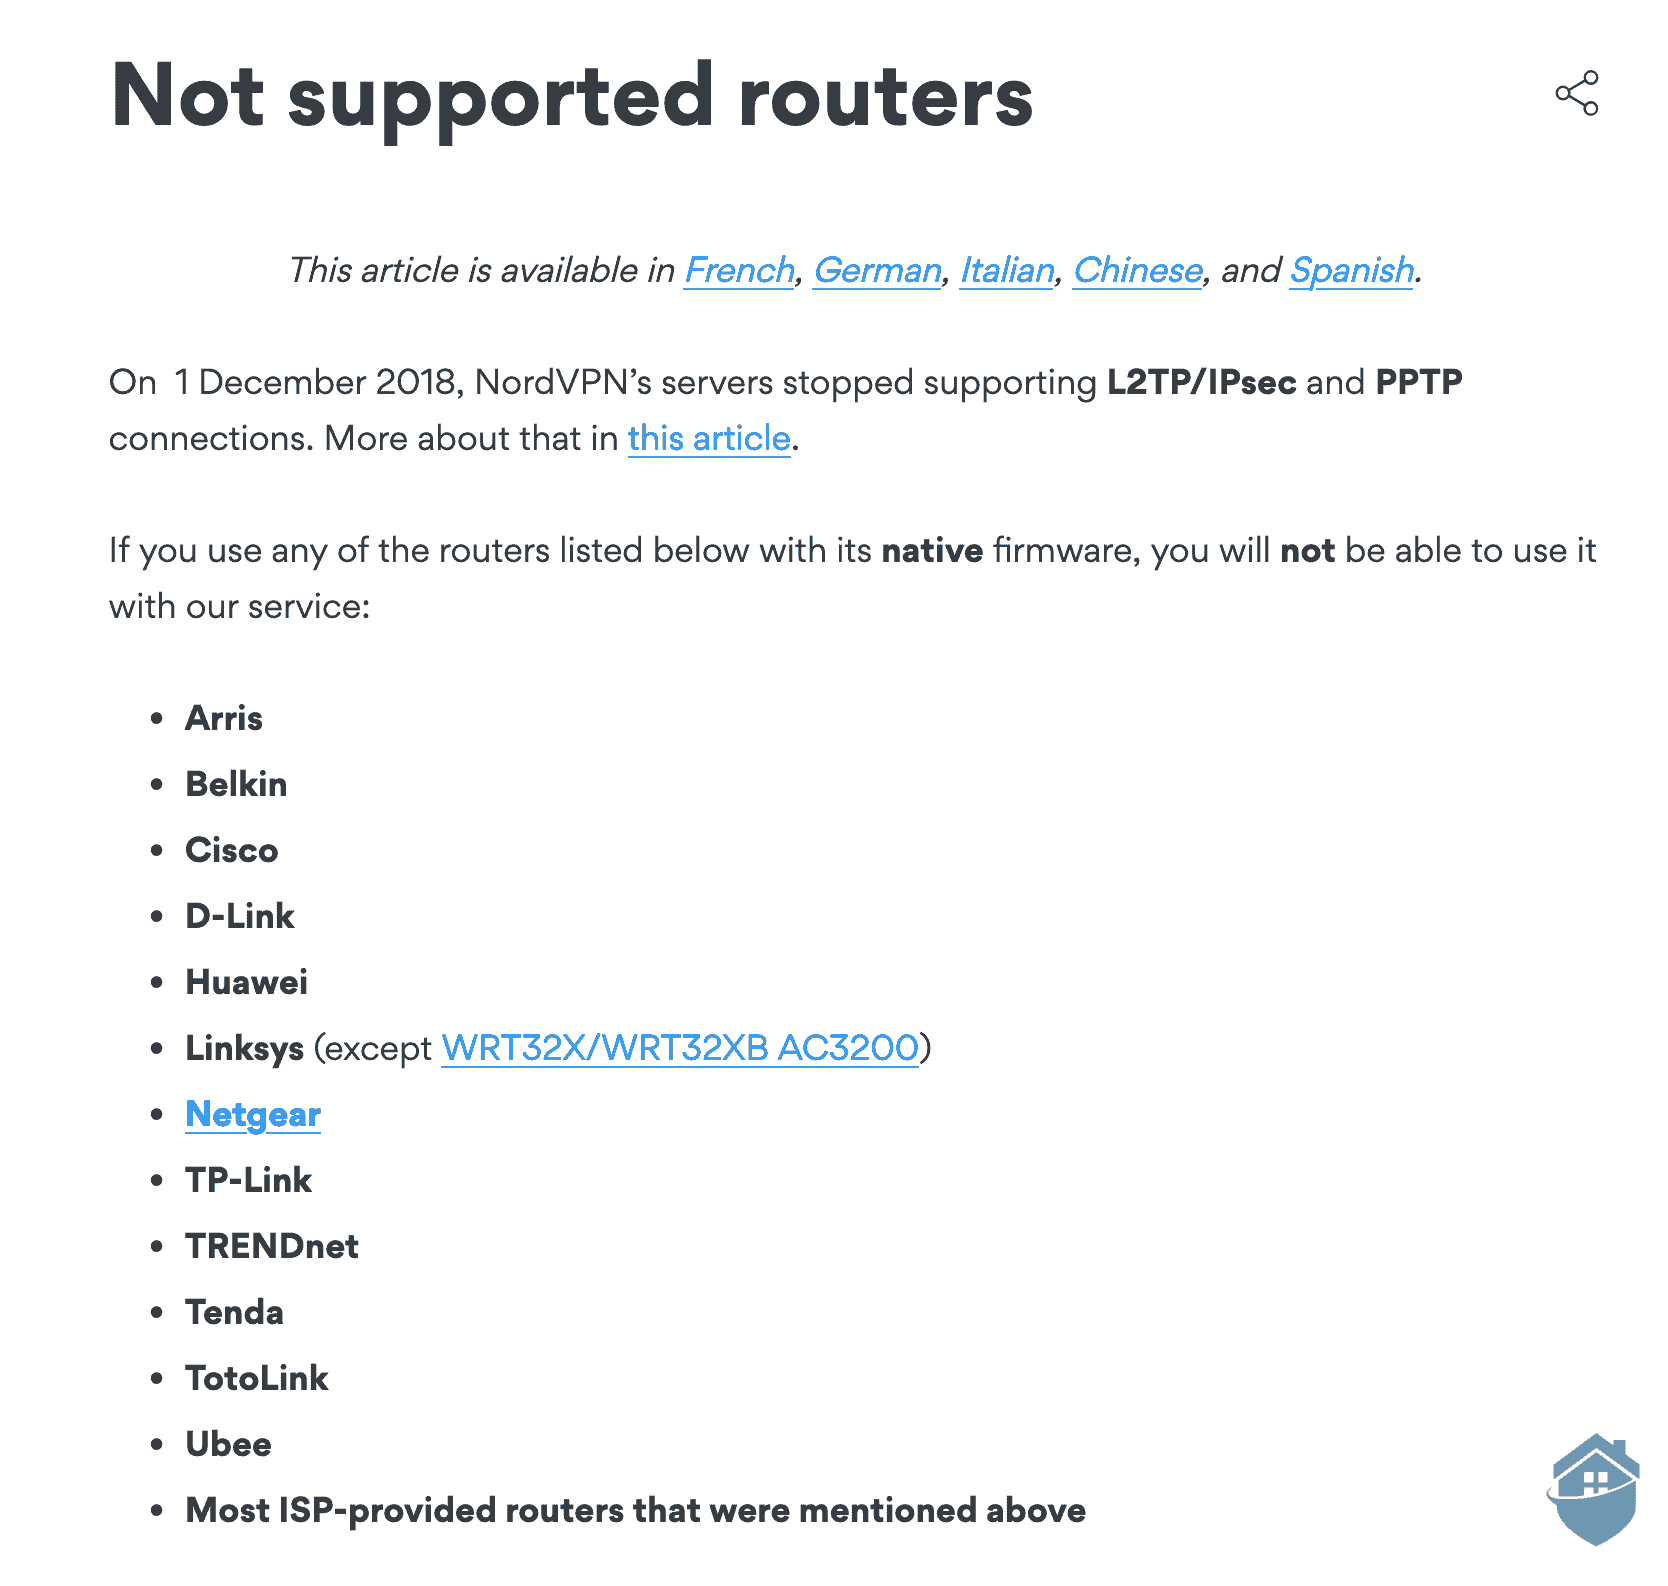 The list of NordVPN's unsuported routers